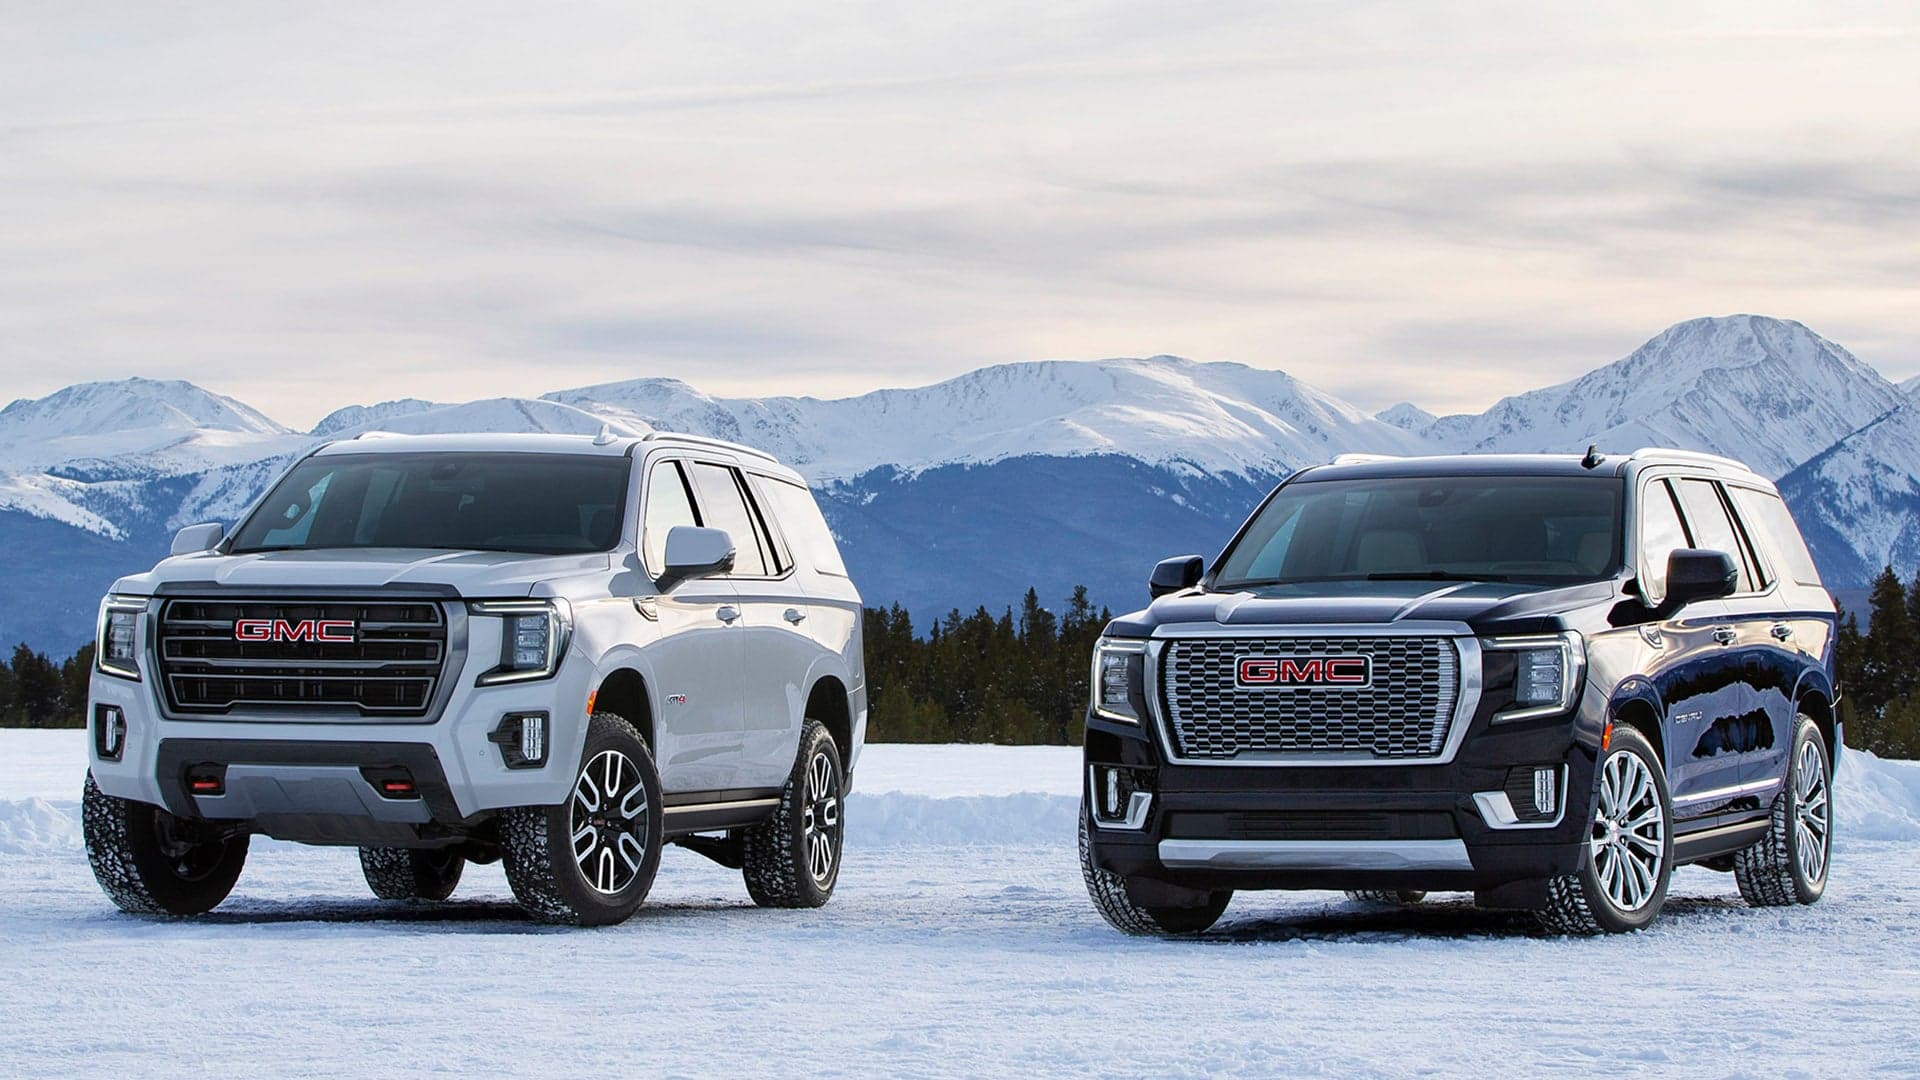 The All-New 2021 GMC Yukon and Yukon XL Are Here, and They Look Pretty Sharp